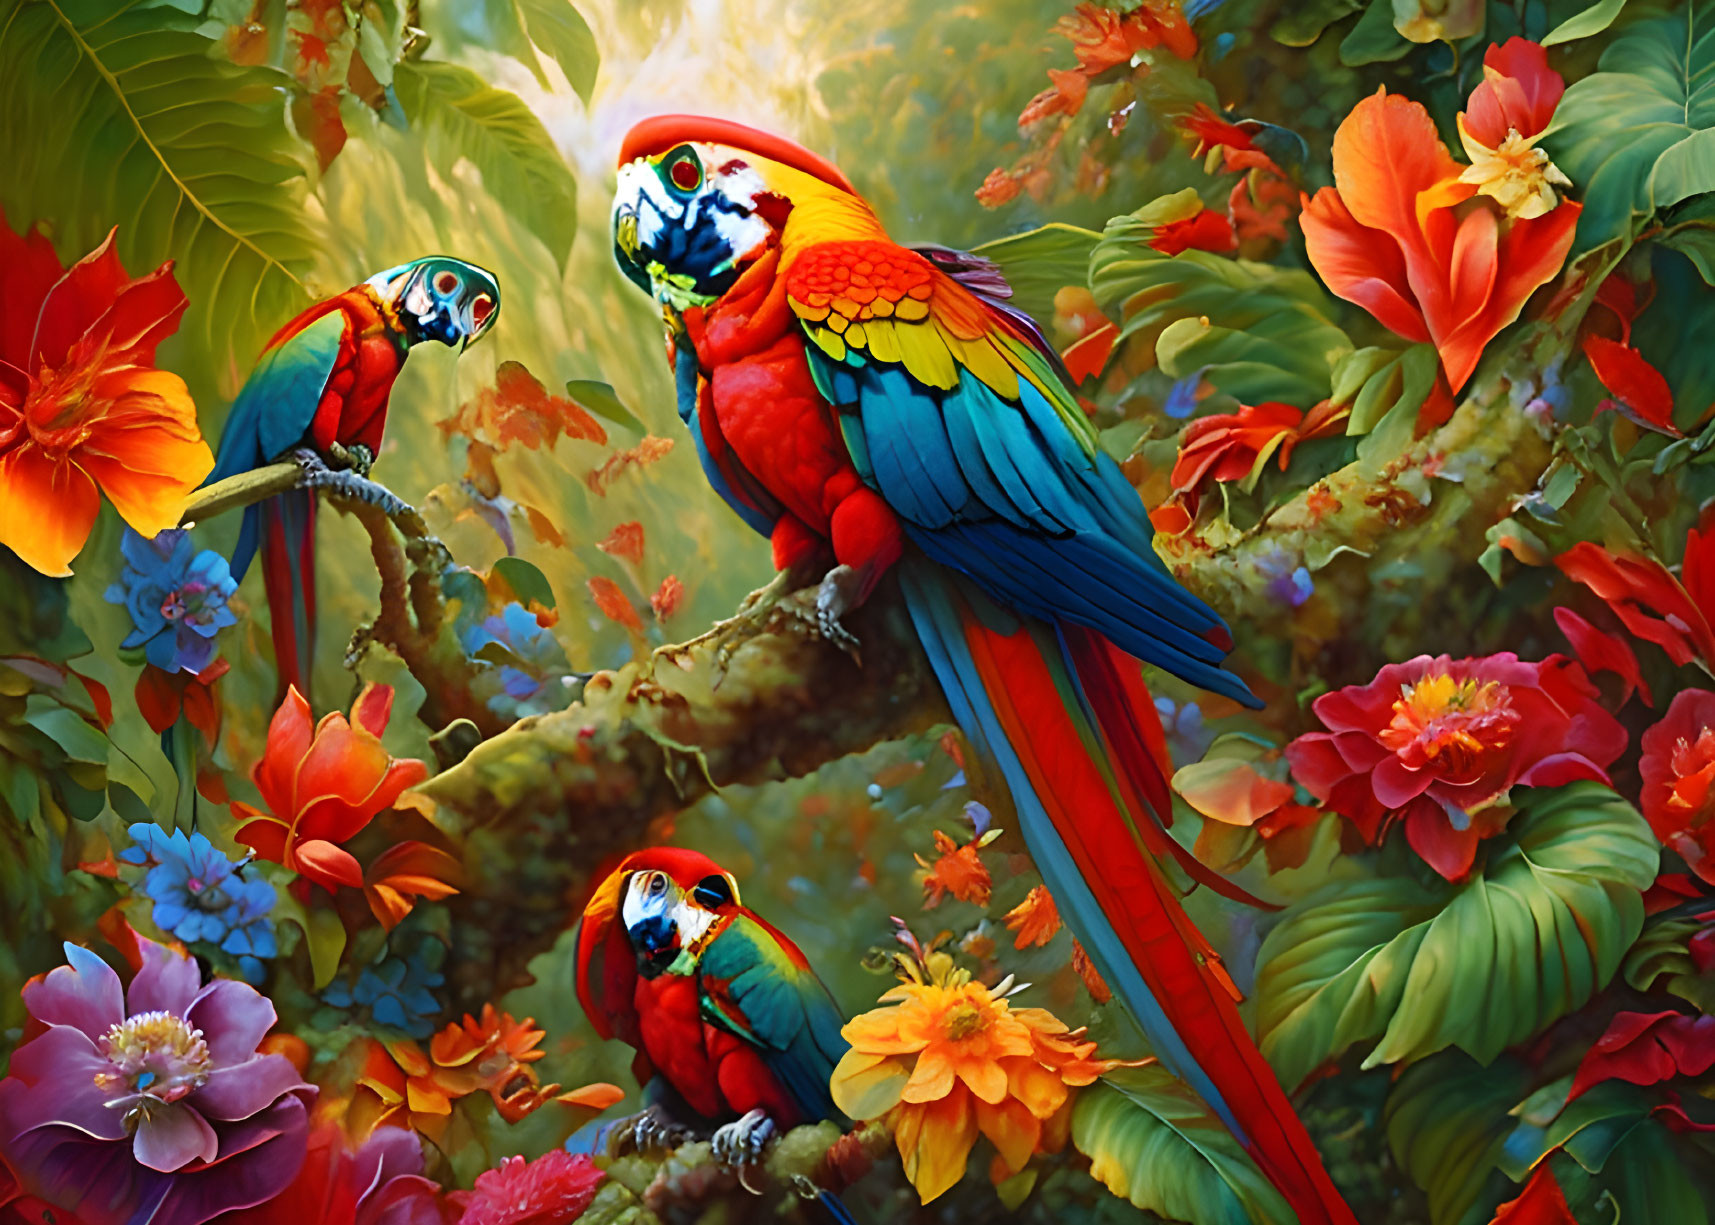 Colorful Parrots in Lush Tropical Setting